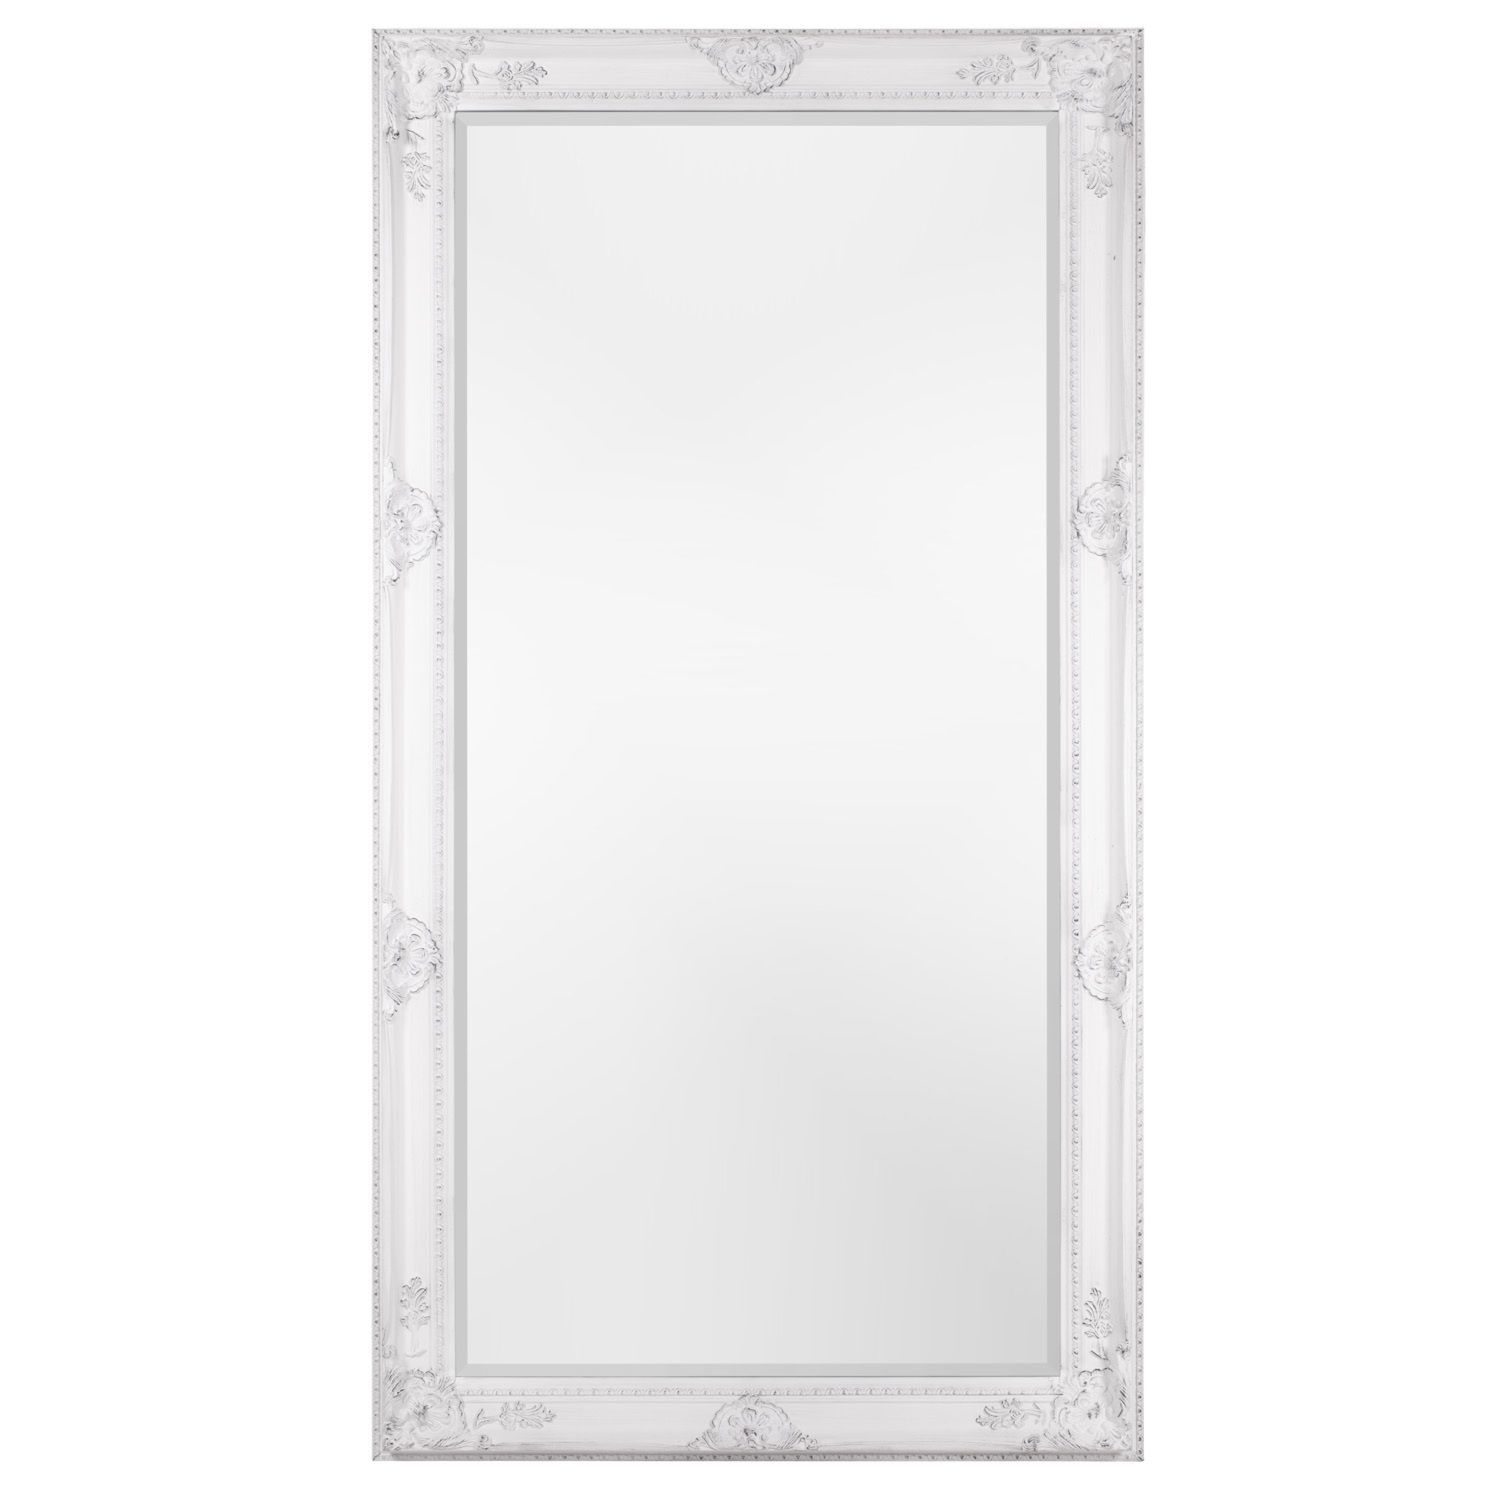 Pewter Ornate Mirror Poundstretcher 5999 To Hang Horizontally With Tall Ornate Mirror (Photo 15 of 15)